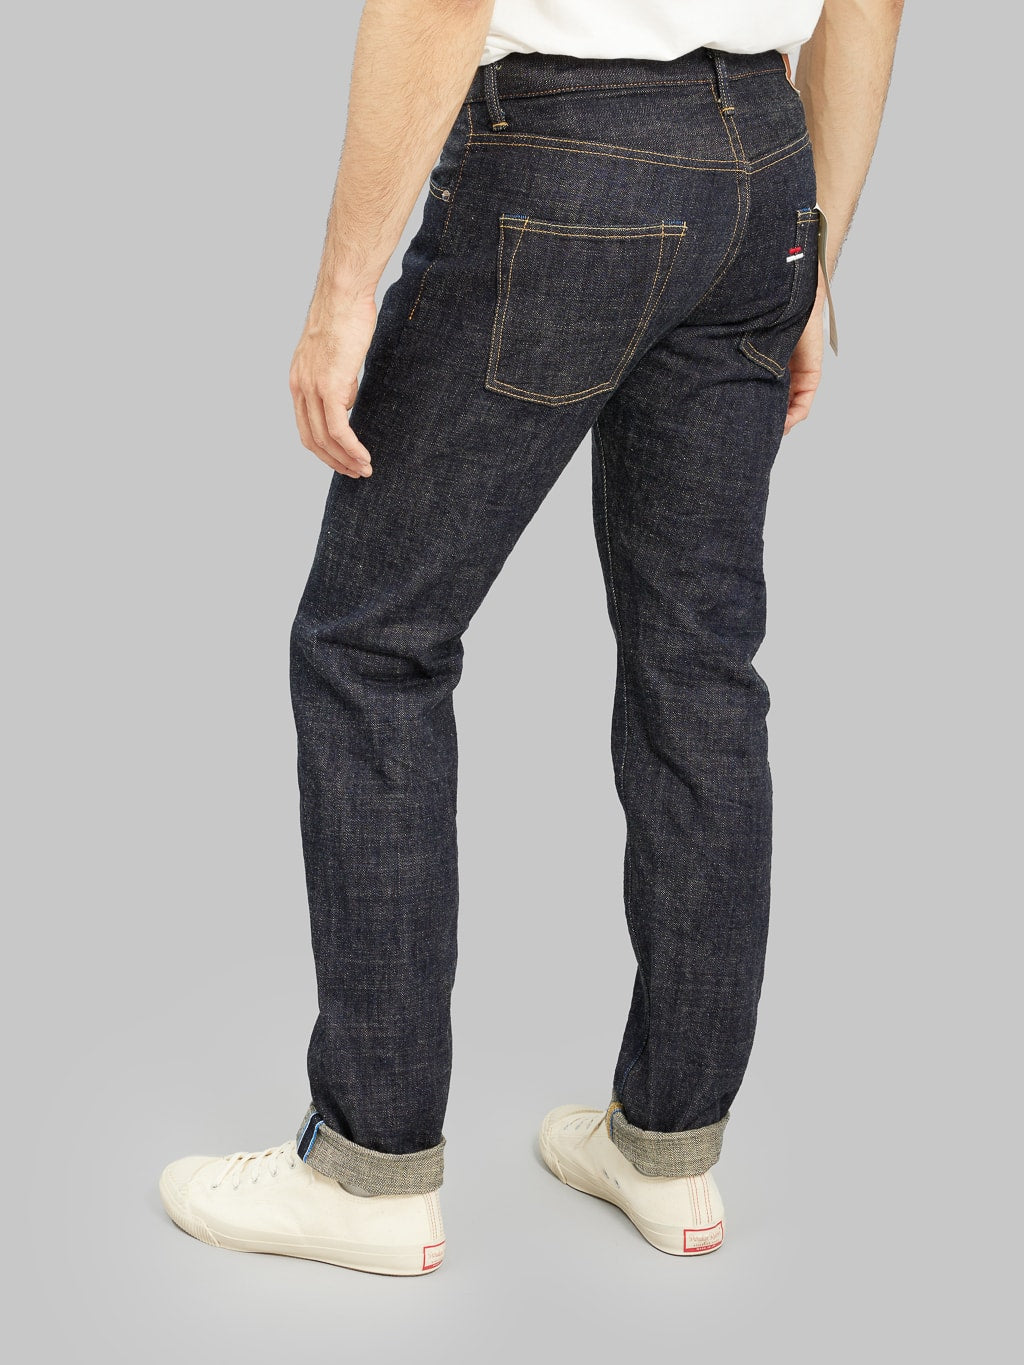 Tanuki Zetto Benkei High Tapered Jeans back fit